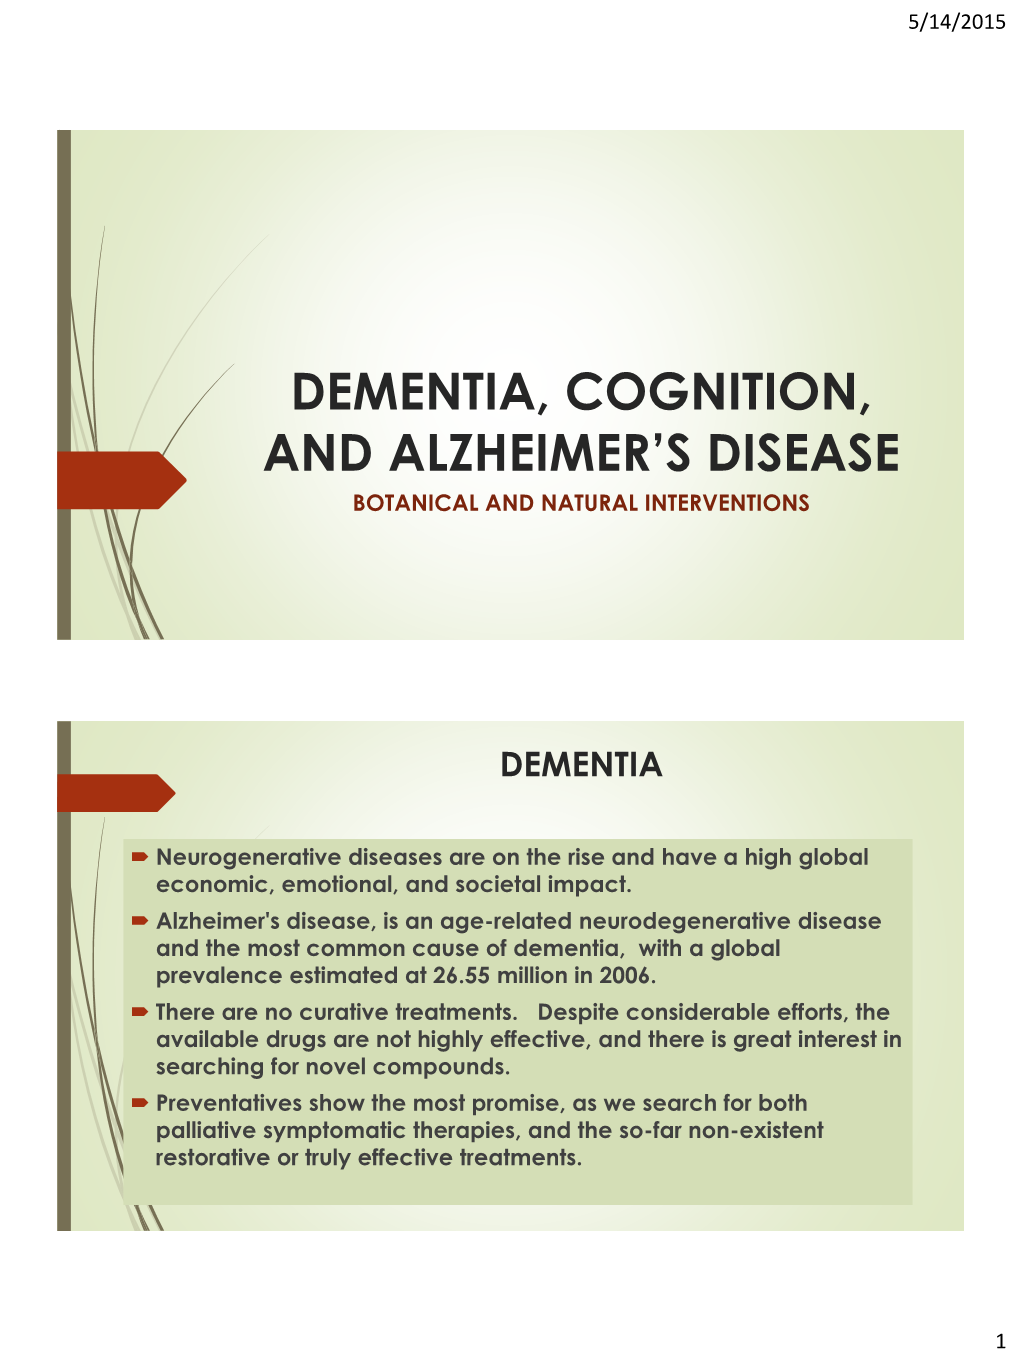 Dementia, Cognition, and Alzheimer's Disease